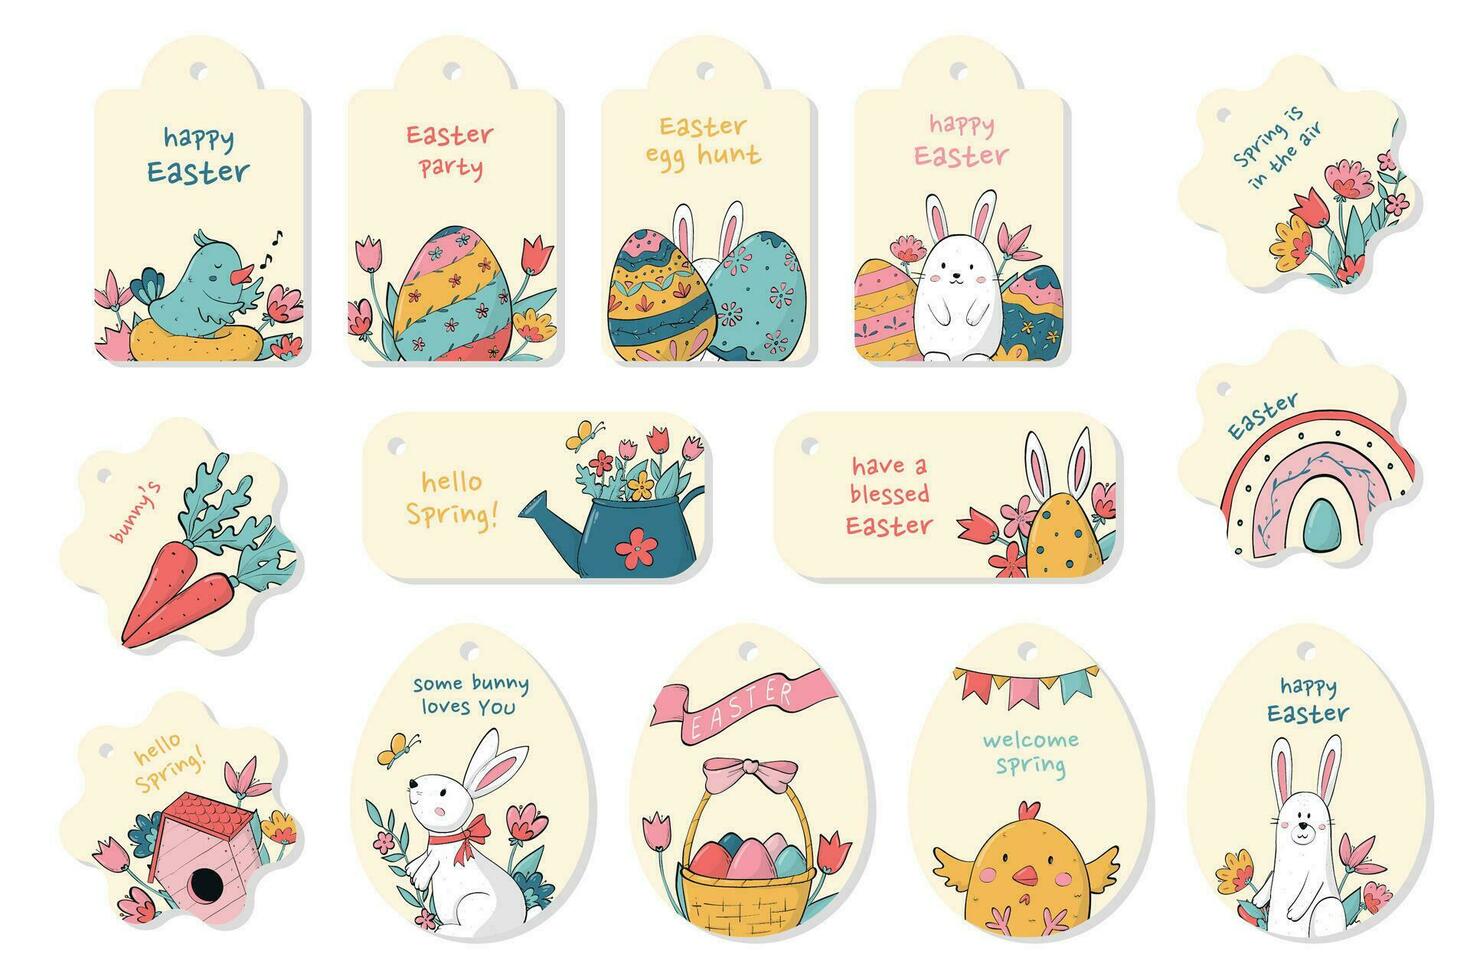 Easter stickers, labels collection. Easter set of 14 gift tags, labels with lettering quotes, doodles and flowers. Good for cards, prints, posters, etc. EPS 10 vector